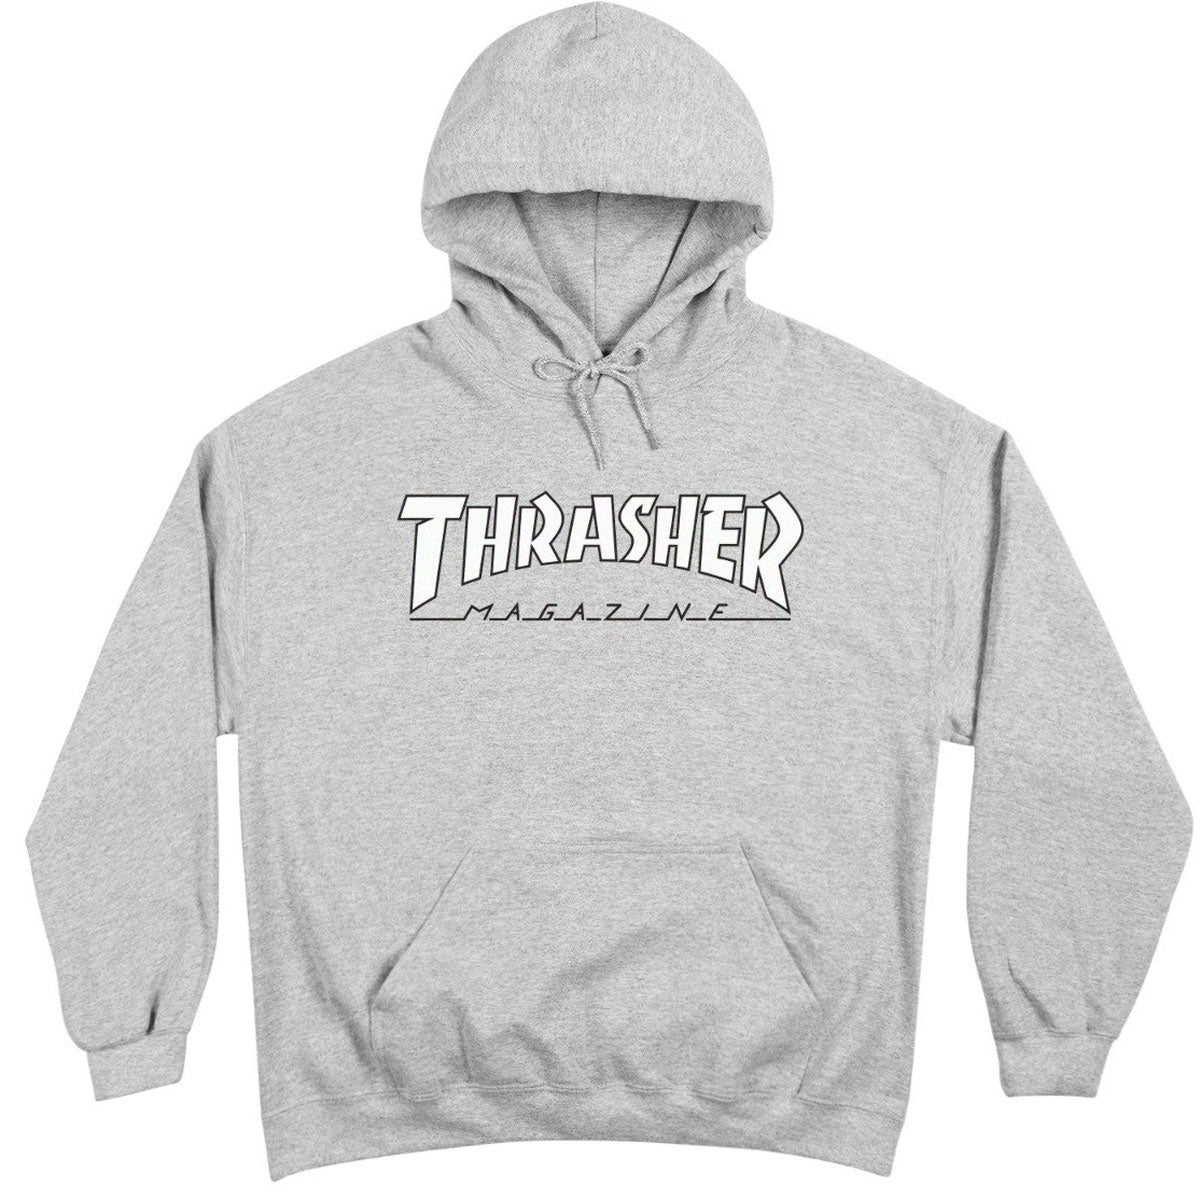 Thrasher Outlined Logo Hoodie - Grey/White image 1